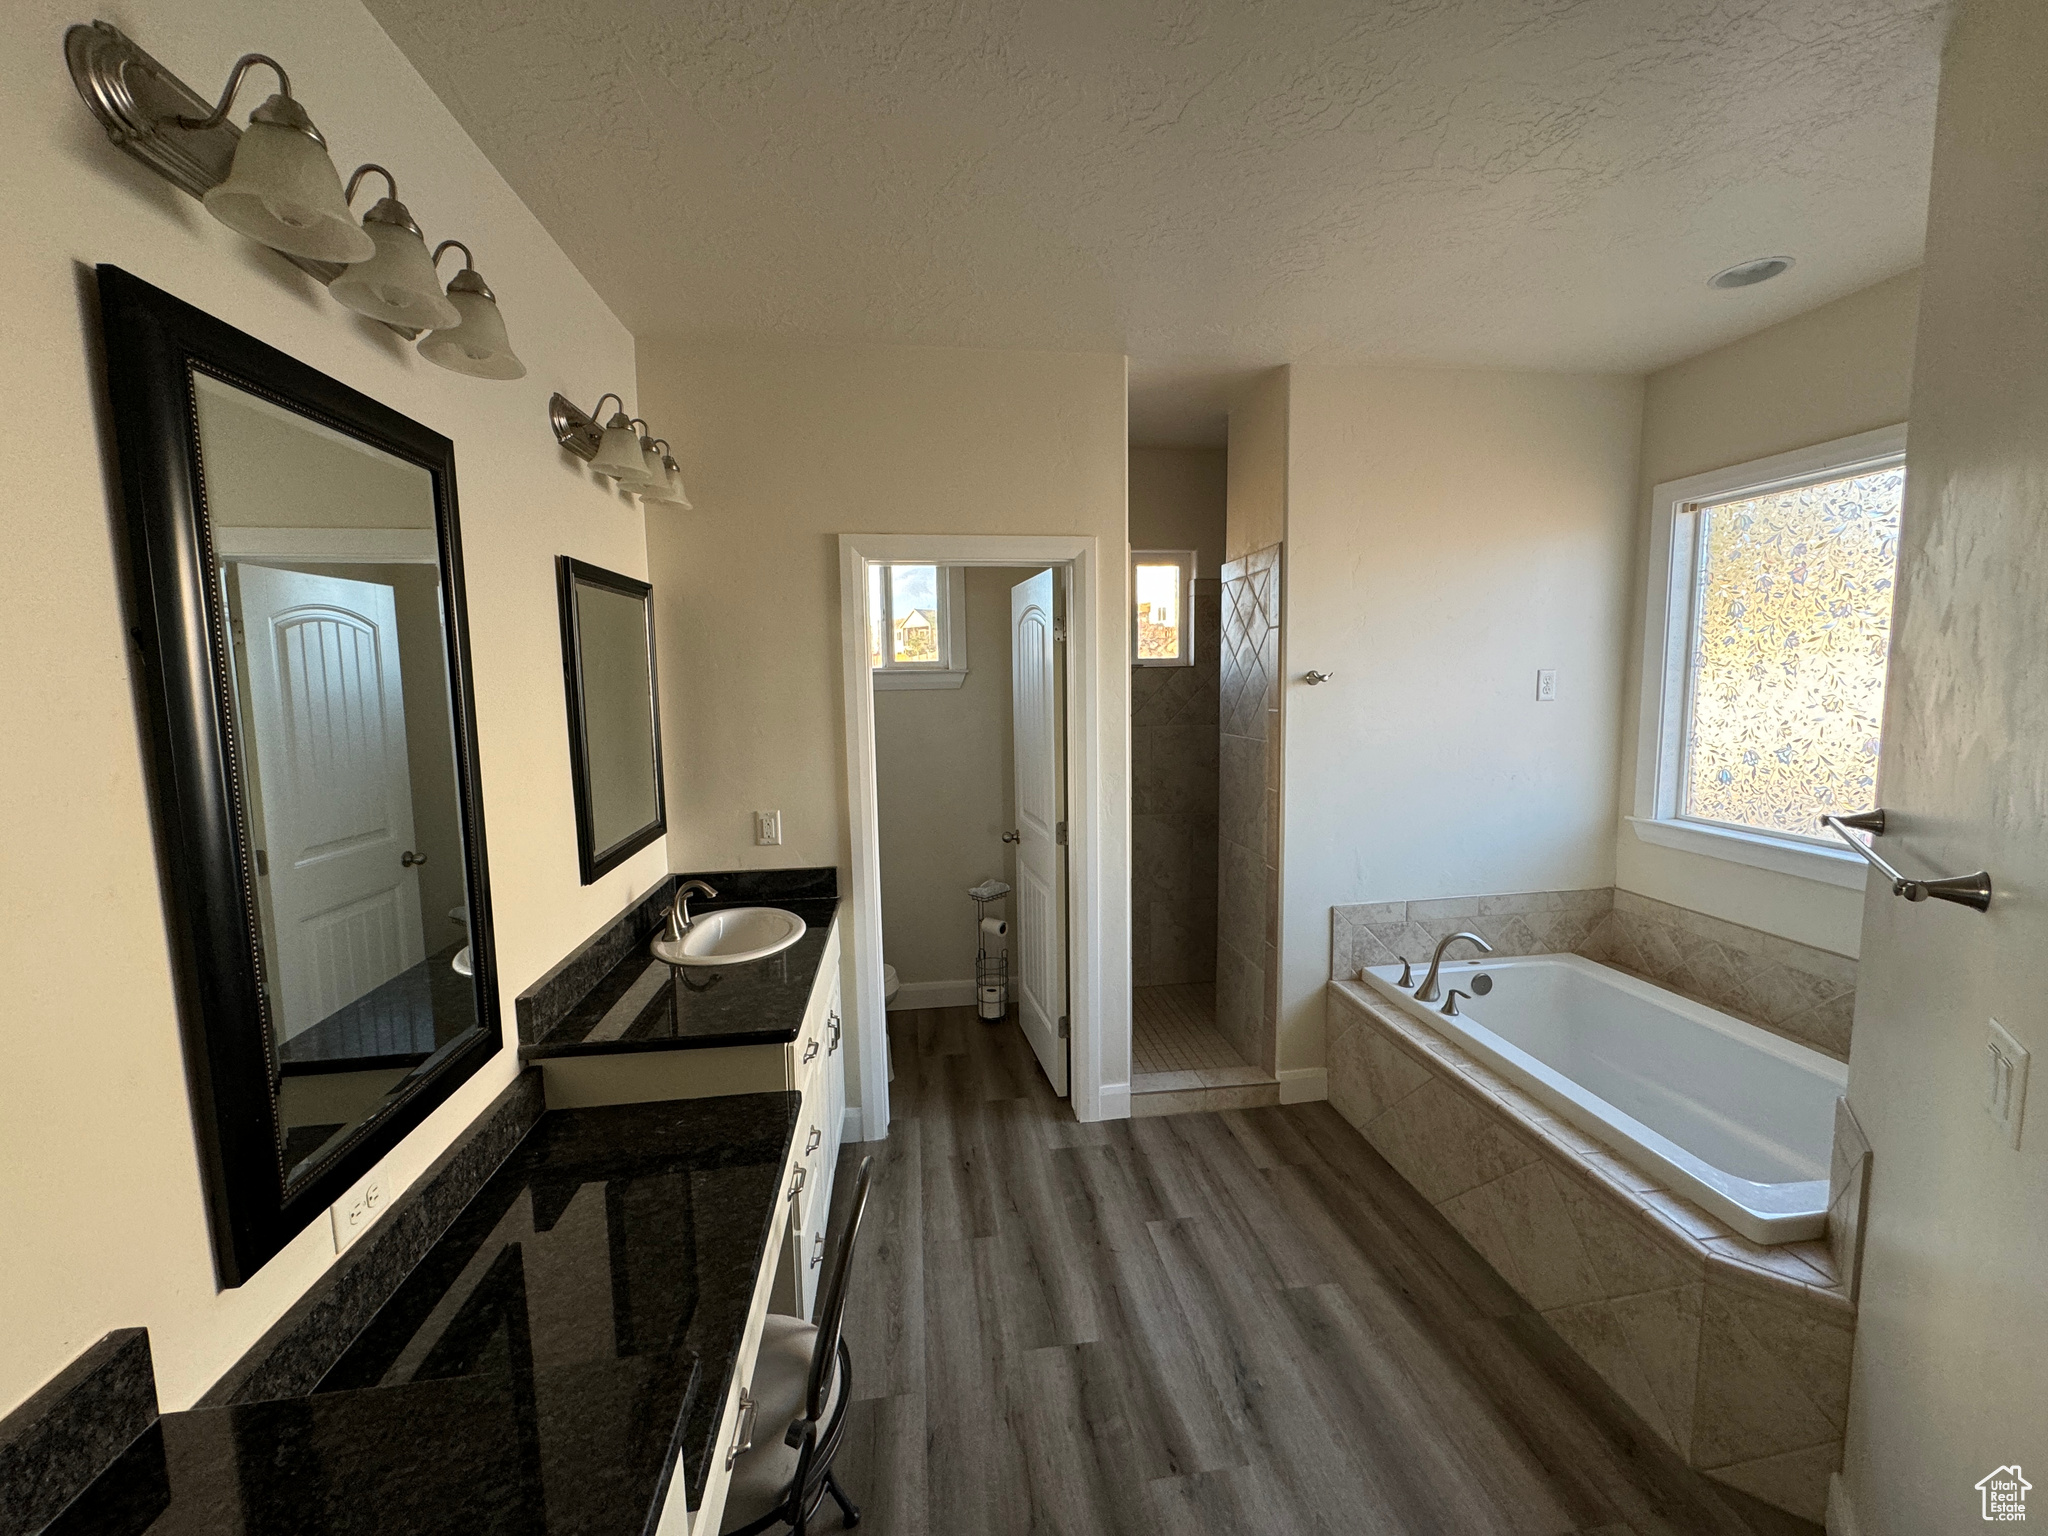 Master Bathroom featuring hardwood / wood-style flooring, a relaxing tiled bath, a textured ceiling, and vanity with extensive cabinet space